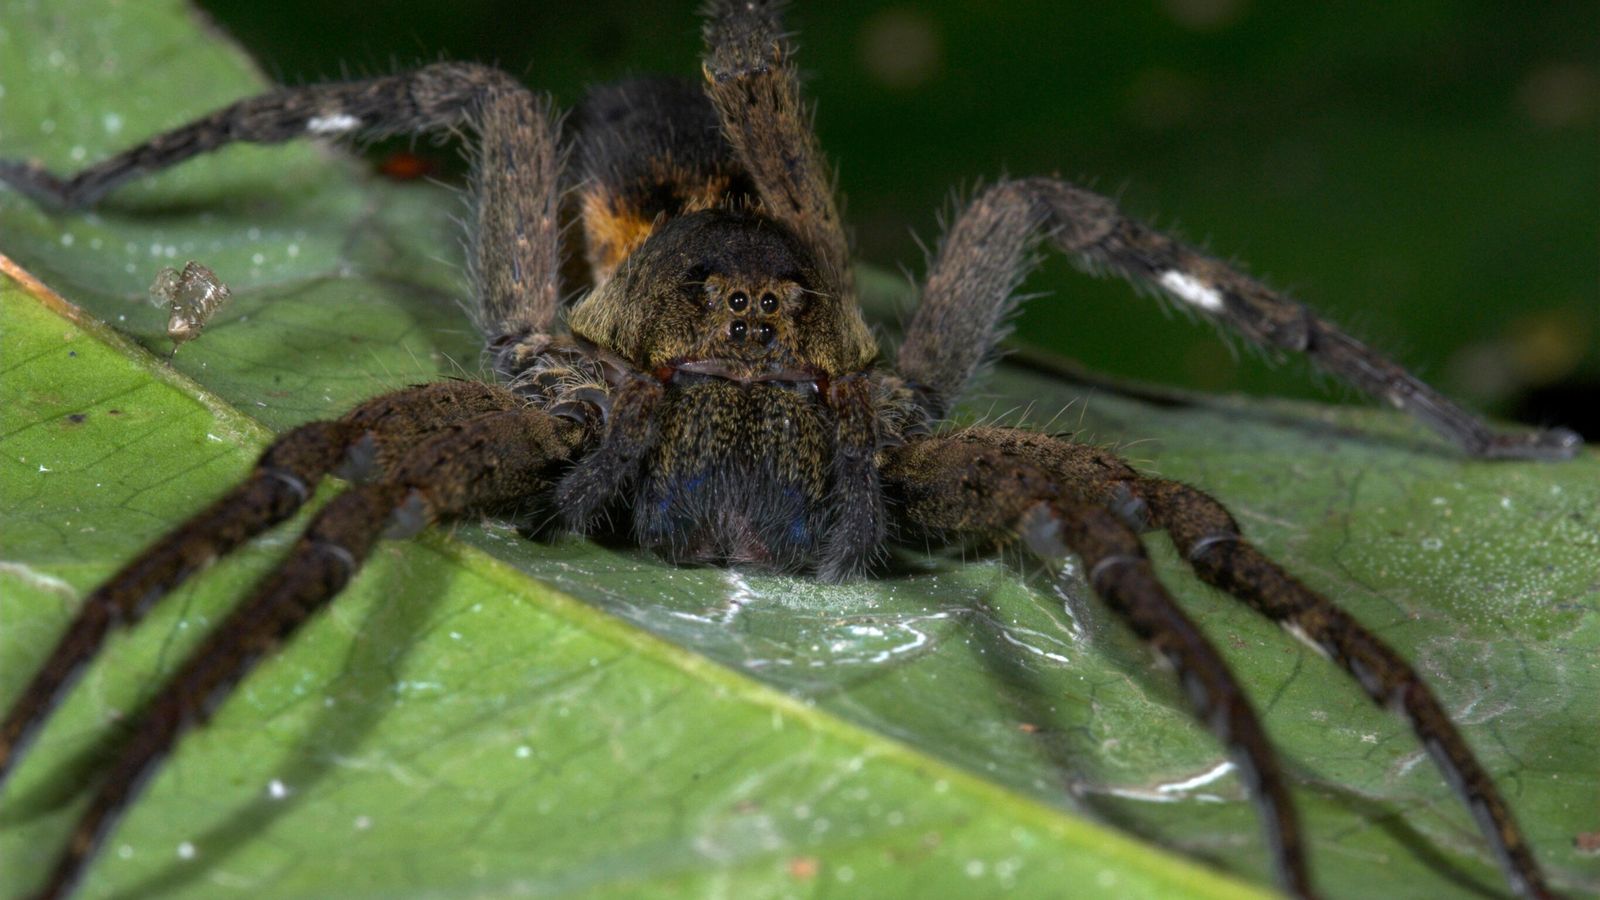 Spider lays eggs in man's toe during cruise holiday